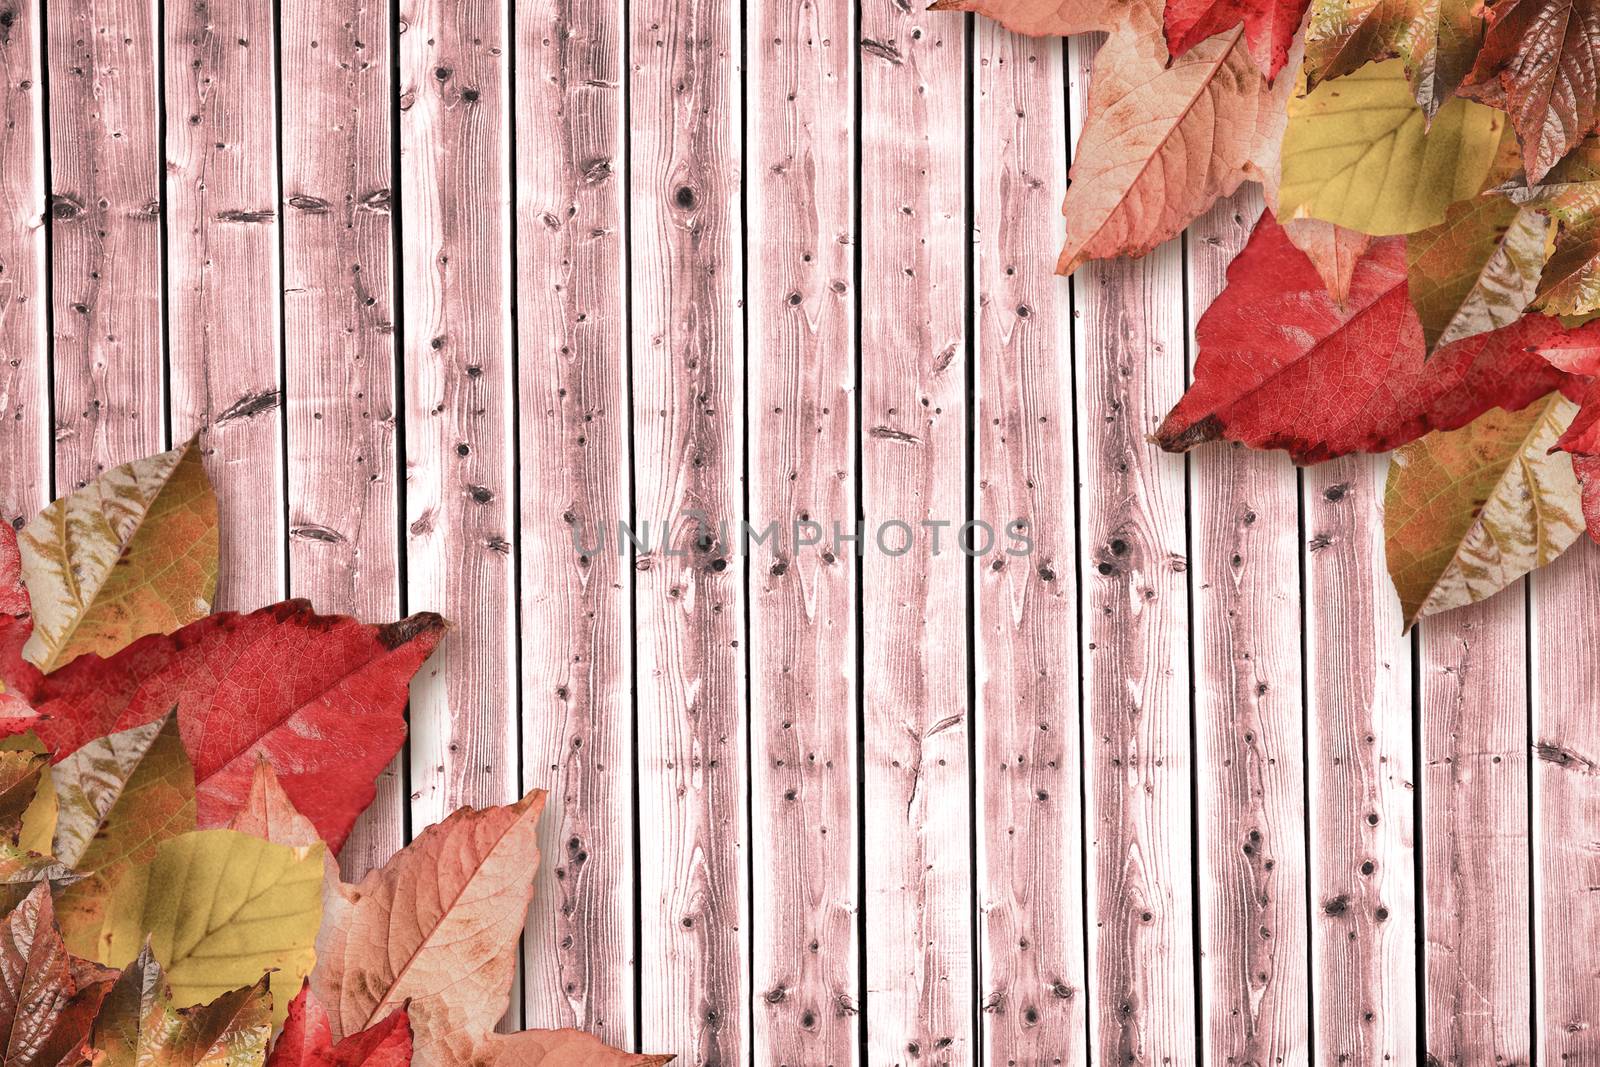 Autumn leaves pattern against wooden planks background